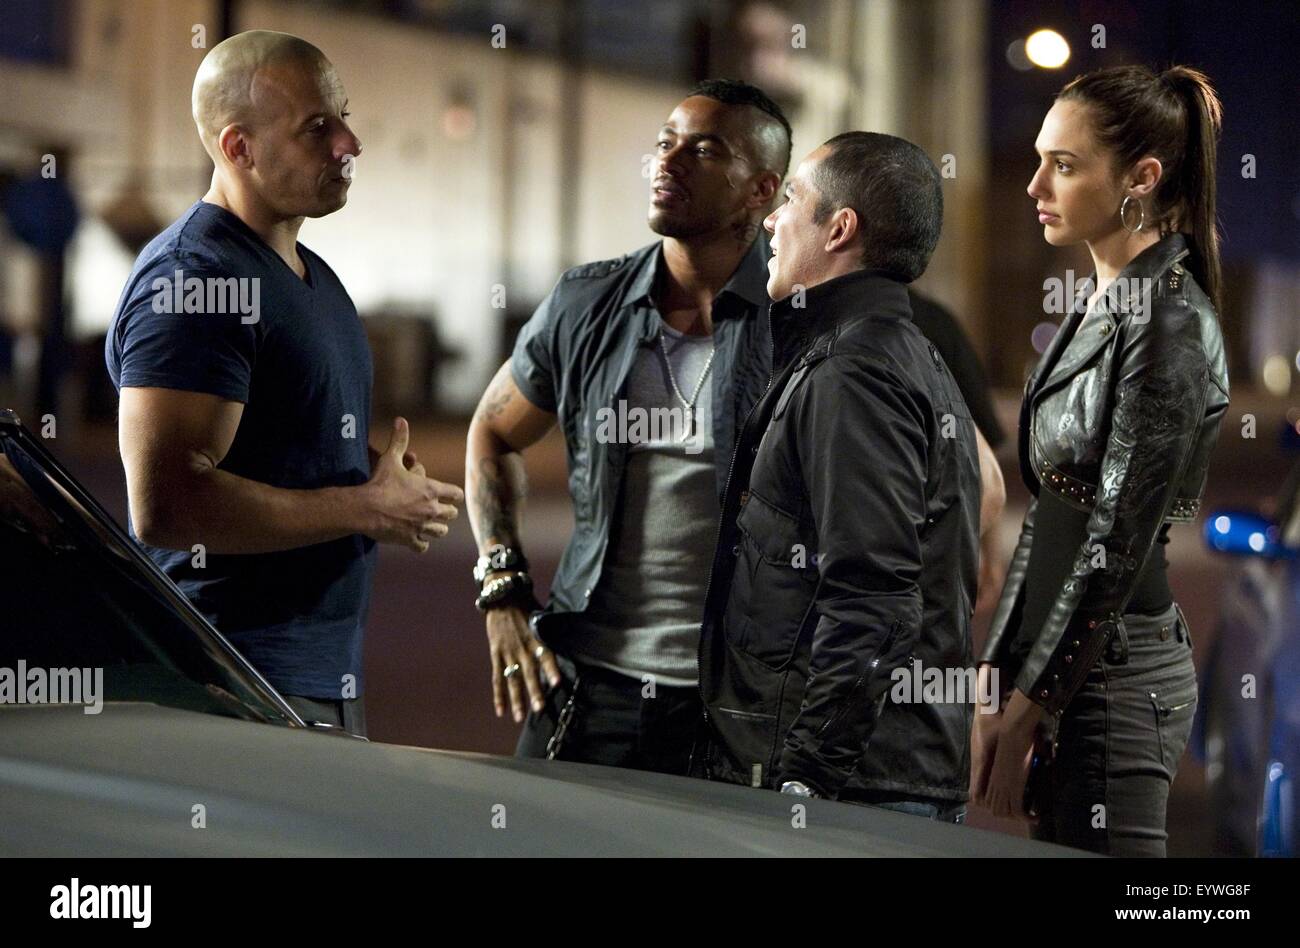 Fast And Furious Gal Gadot High Resolution Stock Photography And Images Alamy Gal gadot is laughing for 5 minutes 😂. https www alamy com stock photo fast and furious year 2009 usa director justin lin vin diesel laz 85998767 html